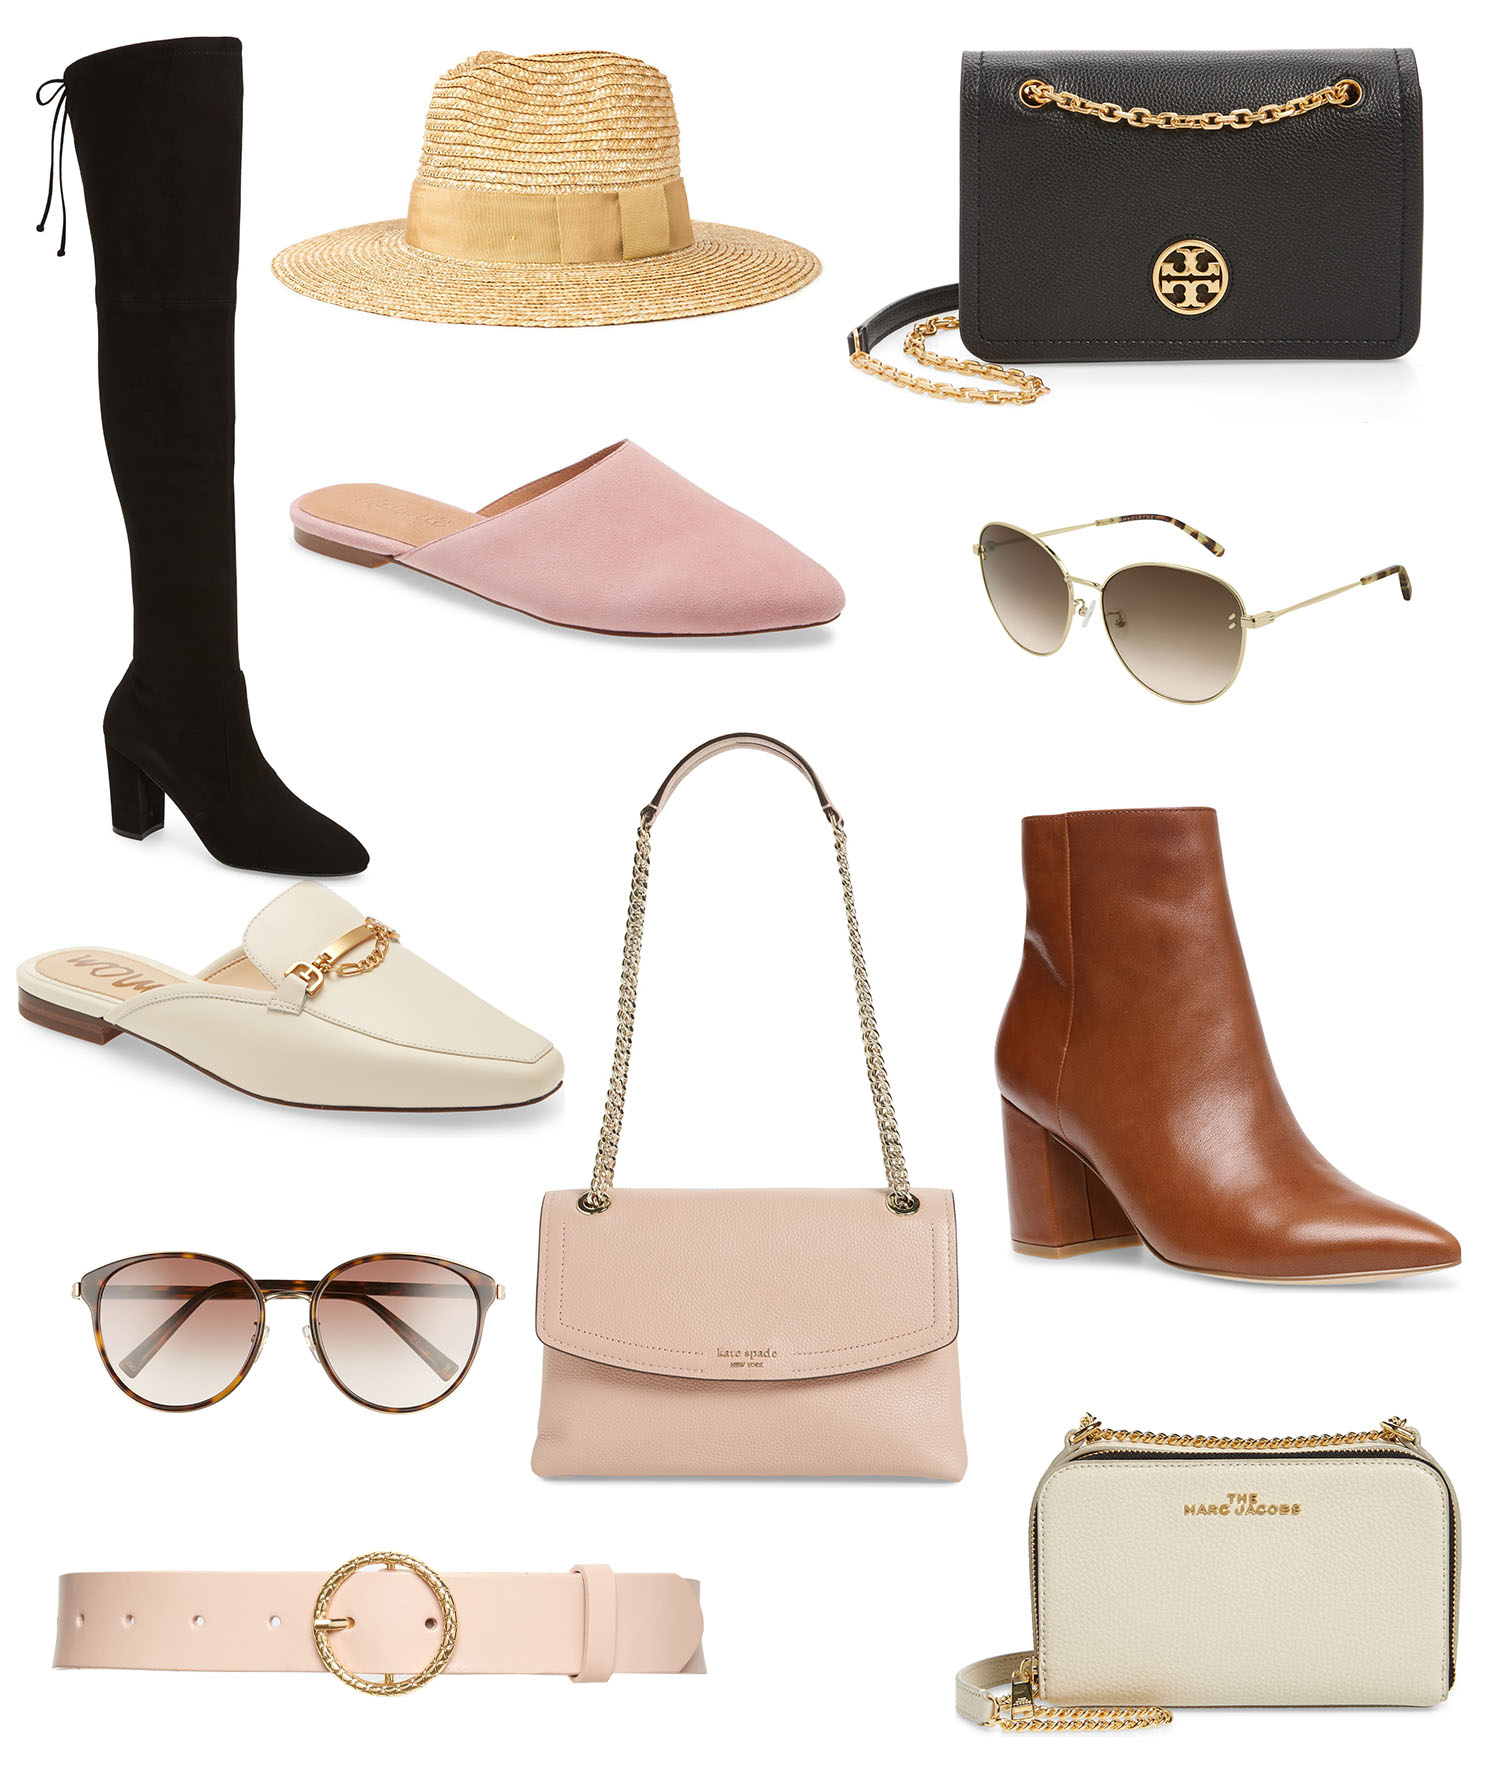 Nordstrom Anniversary Sale Early Access Preview Picks 2020 - Blush & Blooms  - Blush & Blooms // Powered by chloédigital